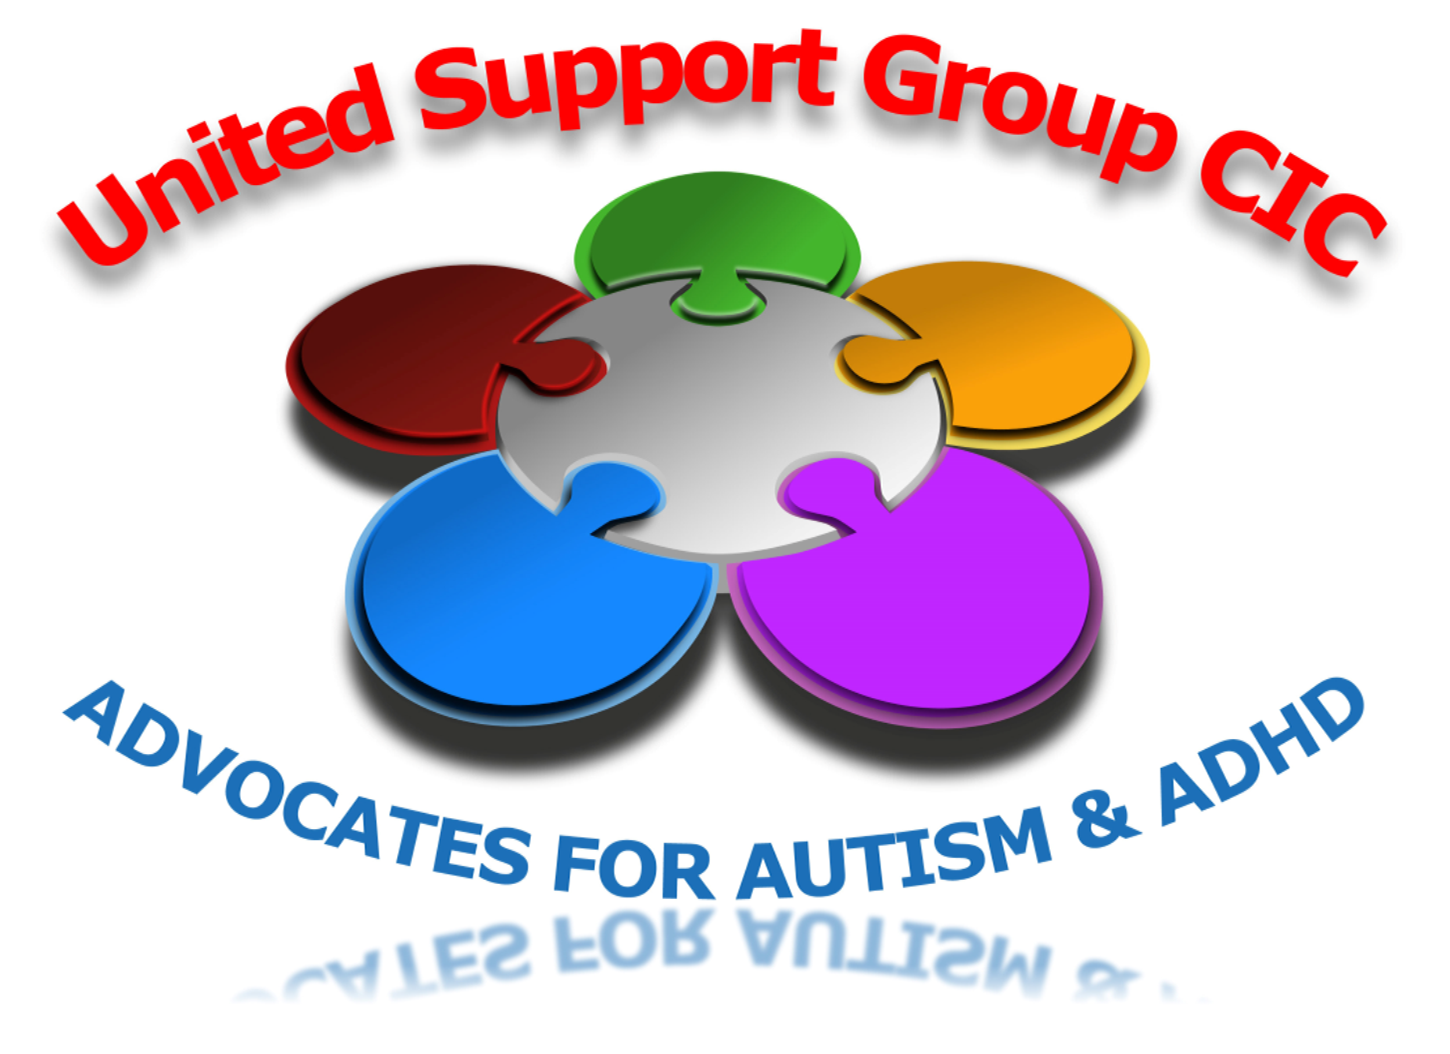 advanced research group united support